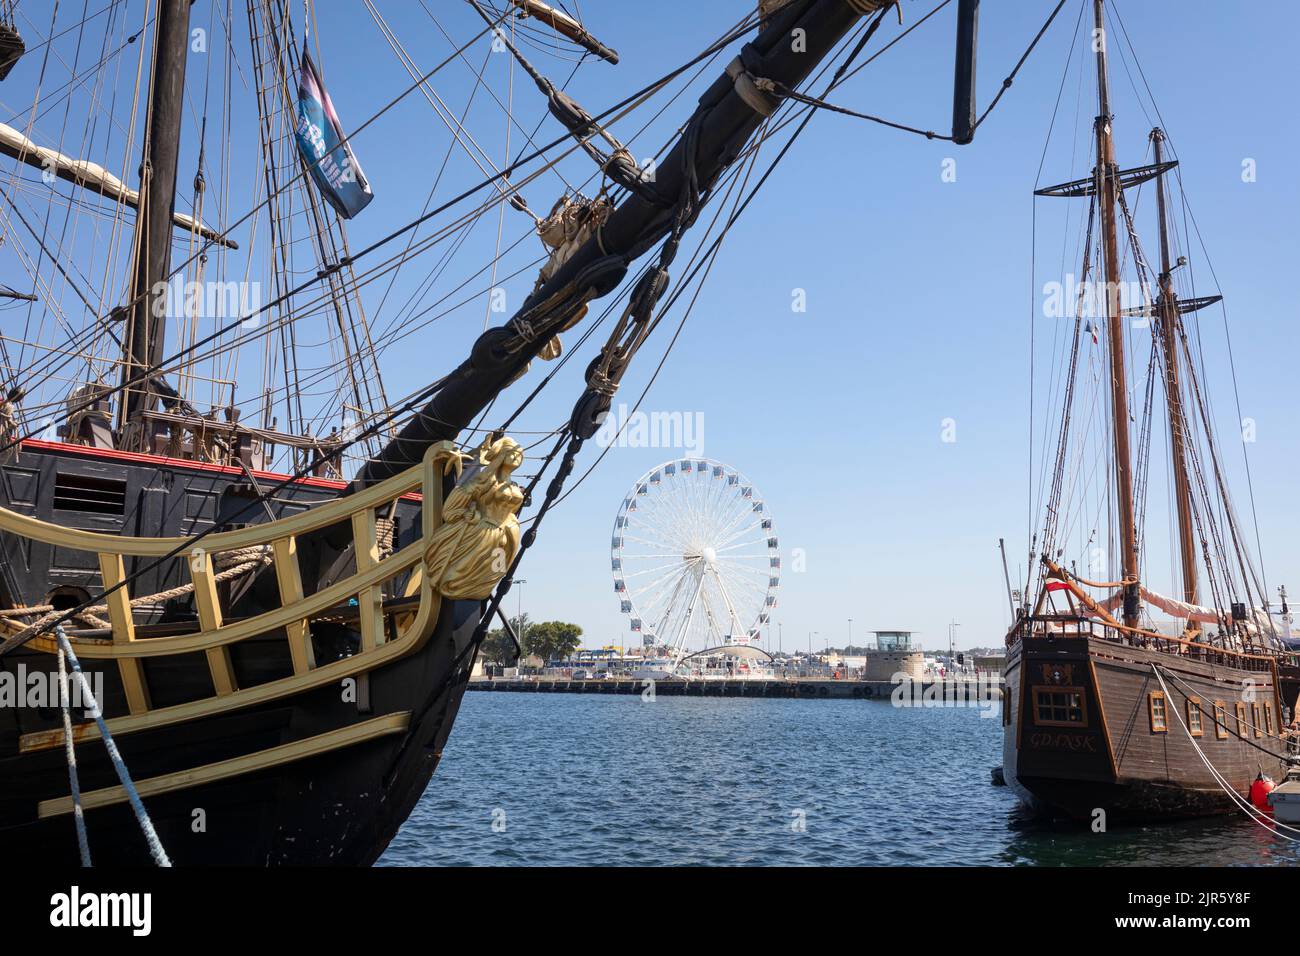 Harbor of Saint Malo with old historical wooden sail ships and  a ferris wheel Stock Photo